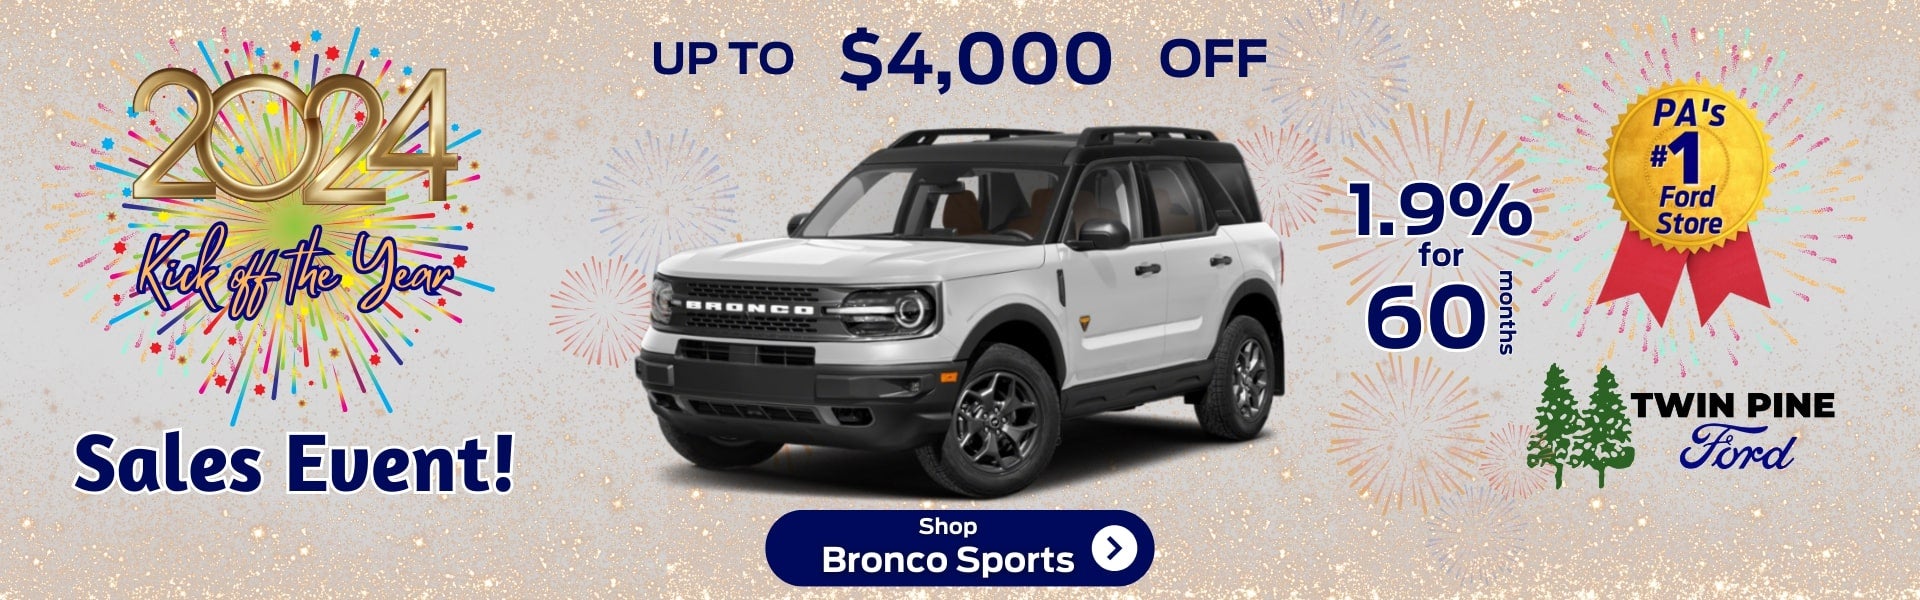 UP TO $4,000 OFF